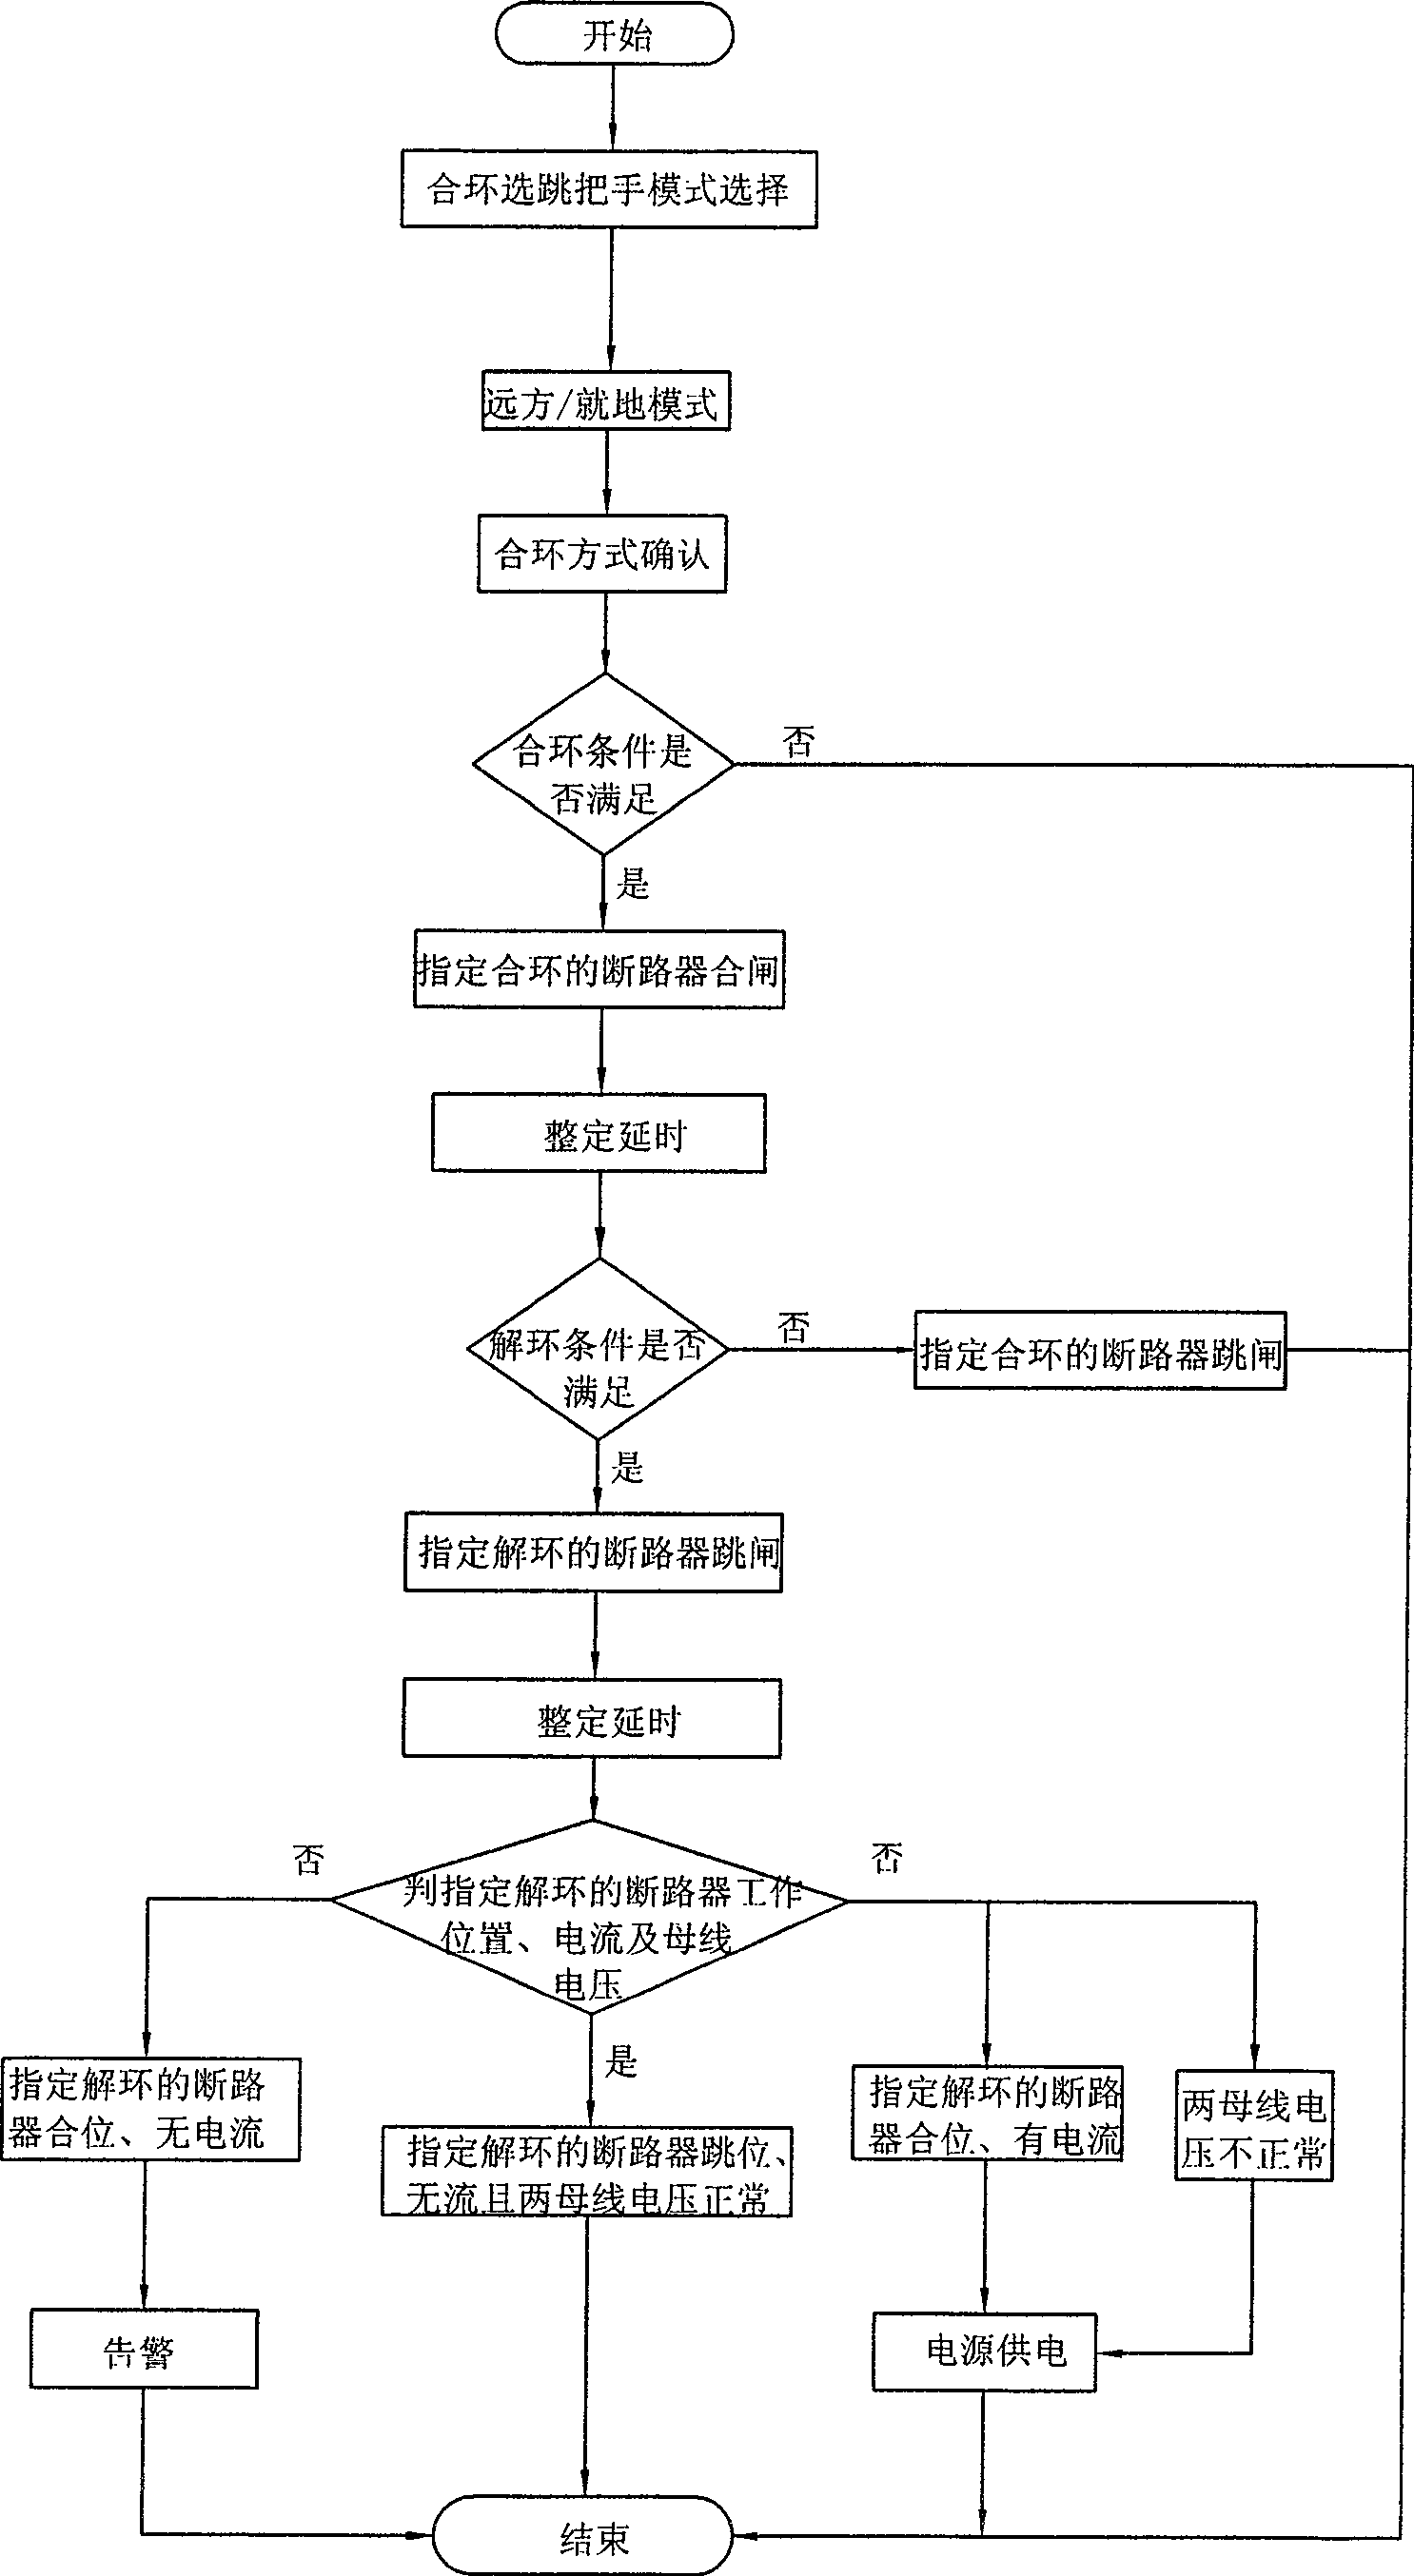 Quick switching method of the transformation station power supply